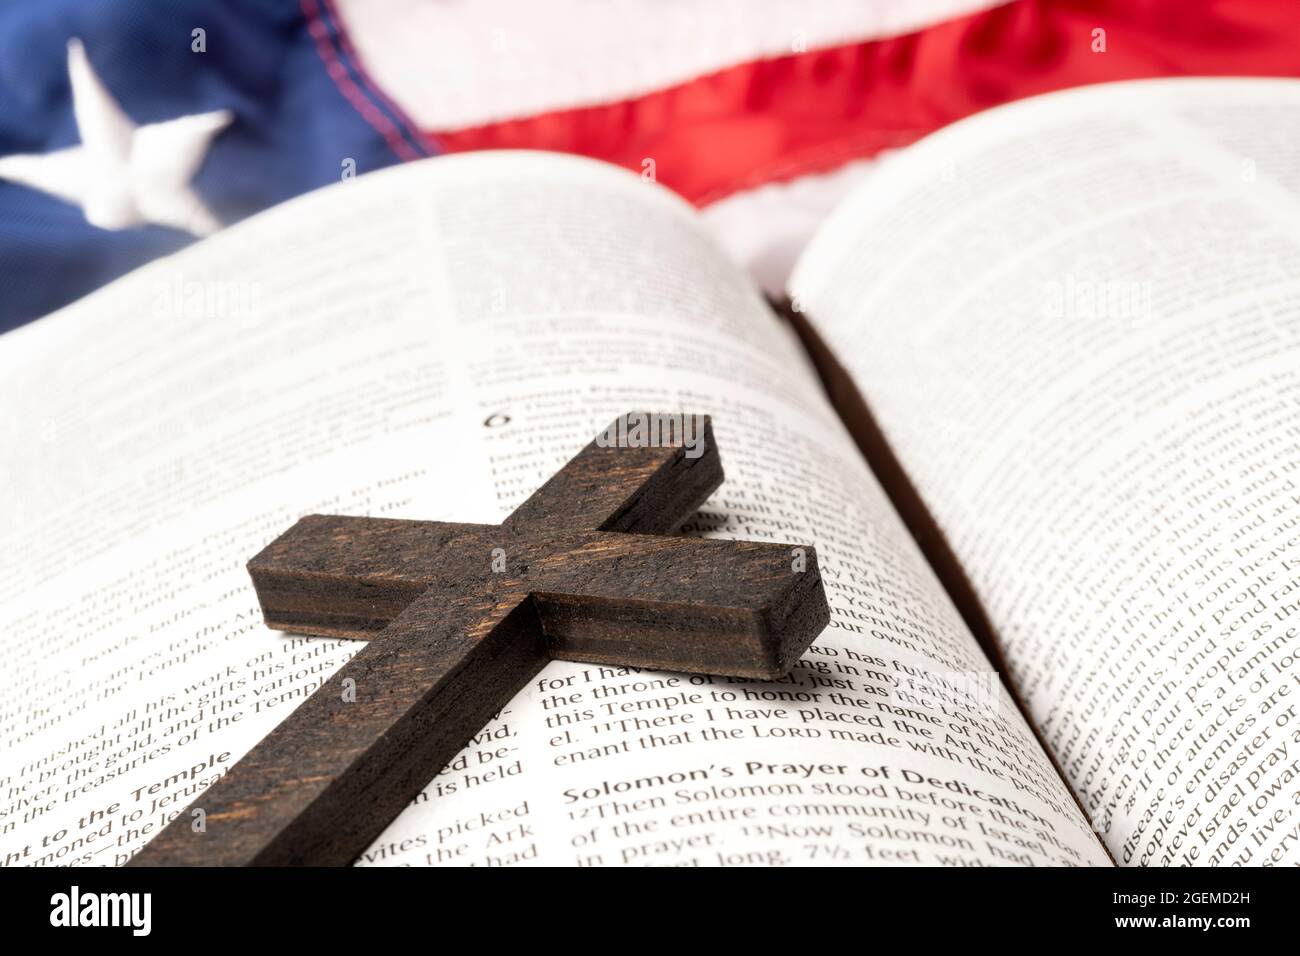 A small wooden cross rests on a bible with the American flag on the table. Stock Photo